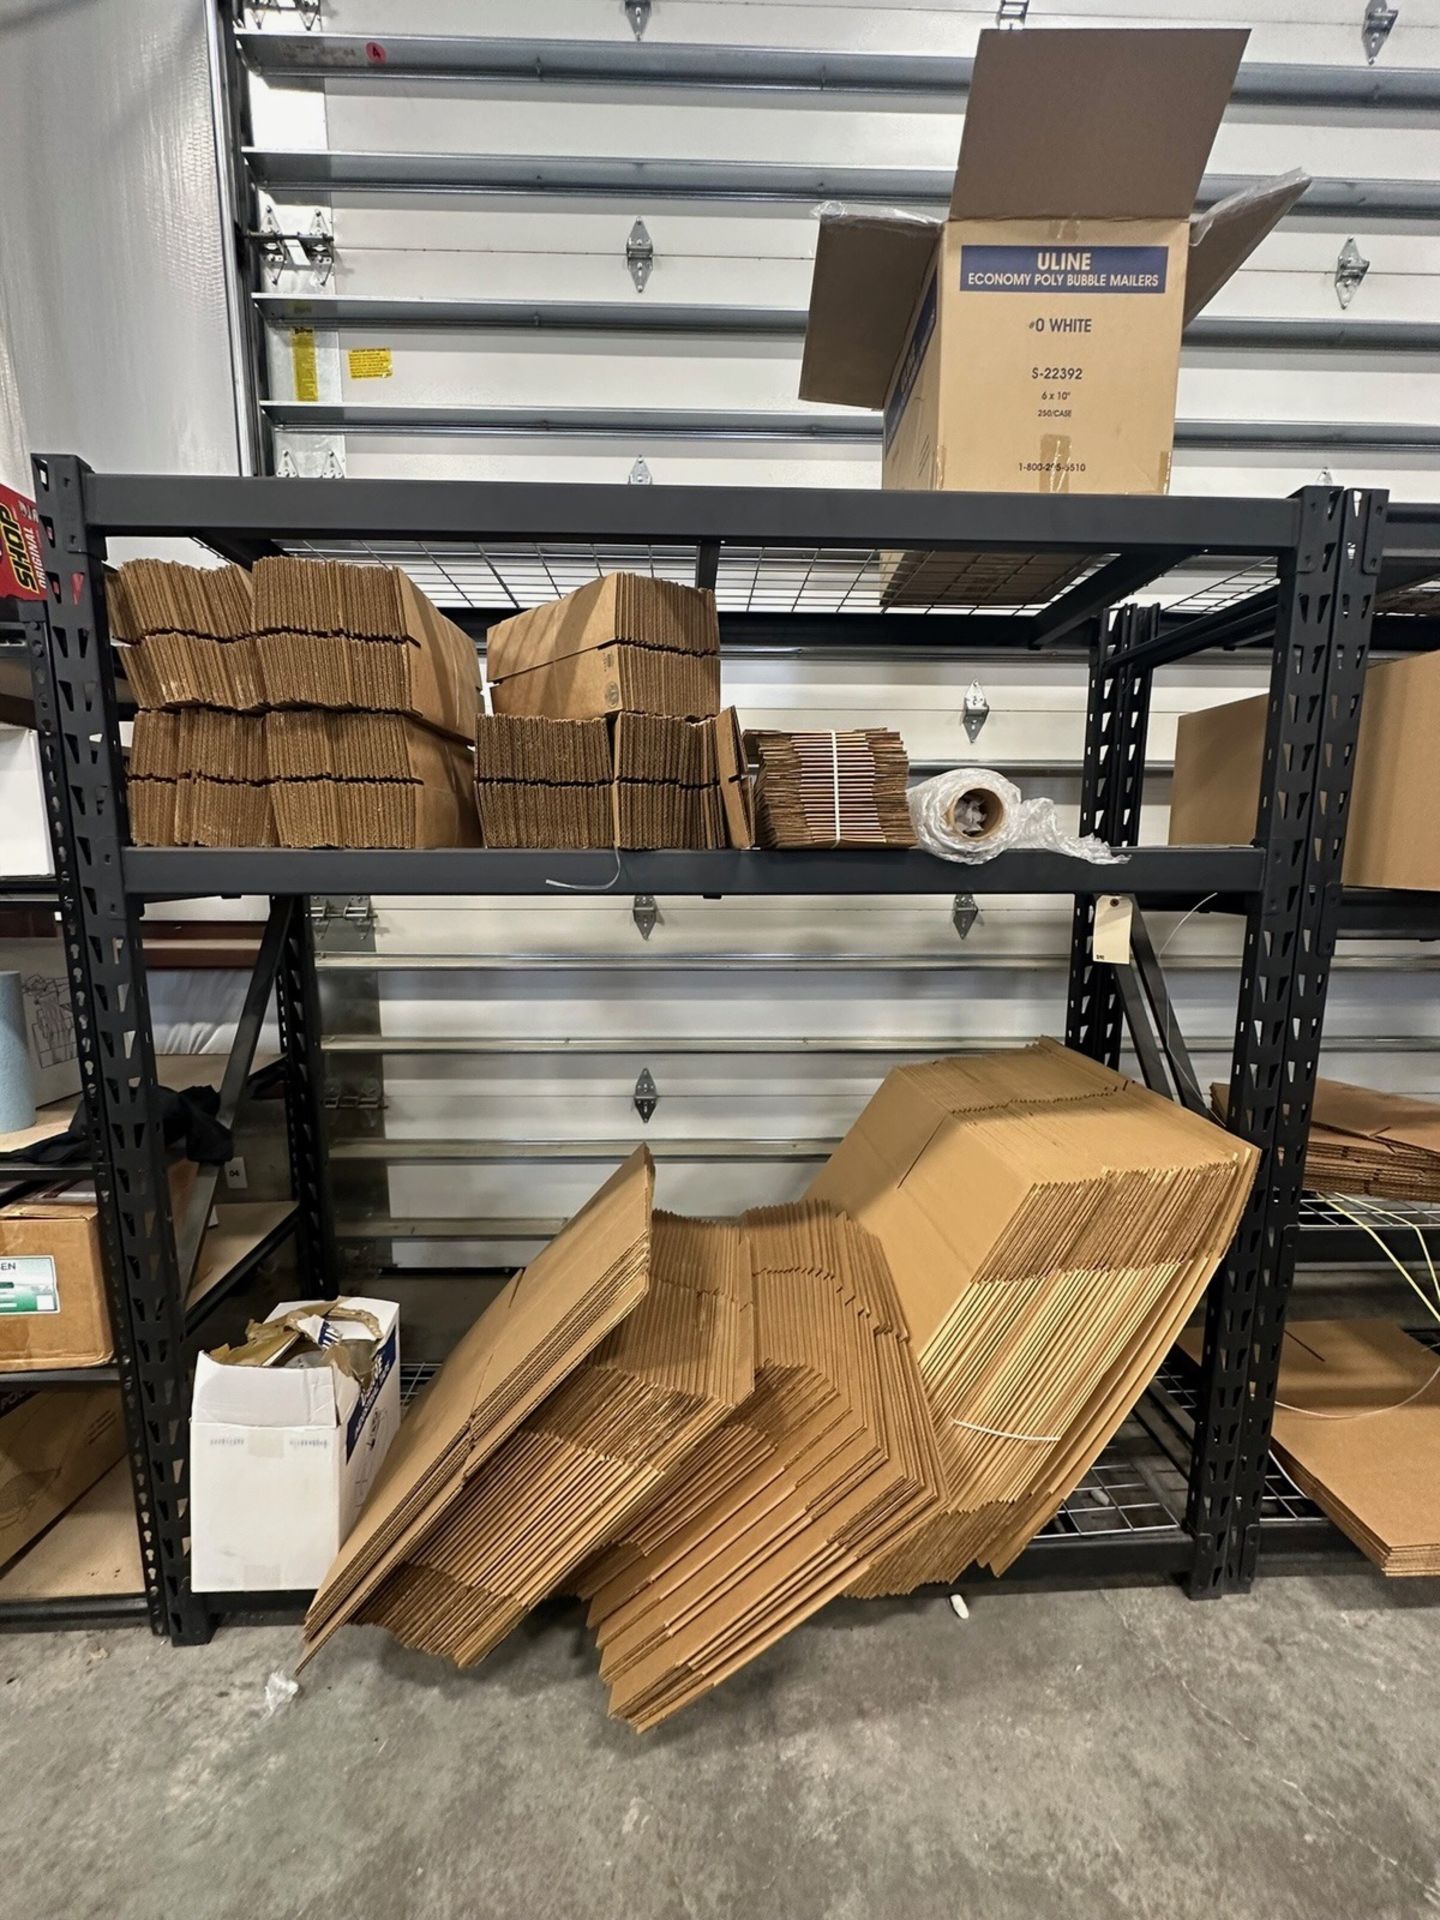 Lot of 7 Shelves No Contents | Rig Fee $200 - Image 2 of 8